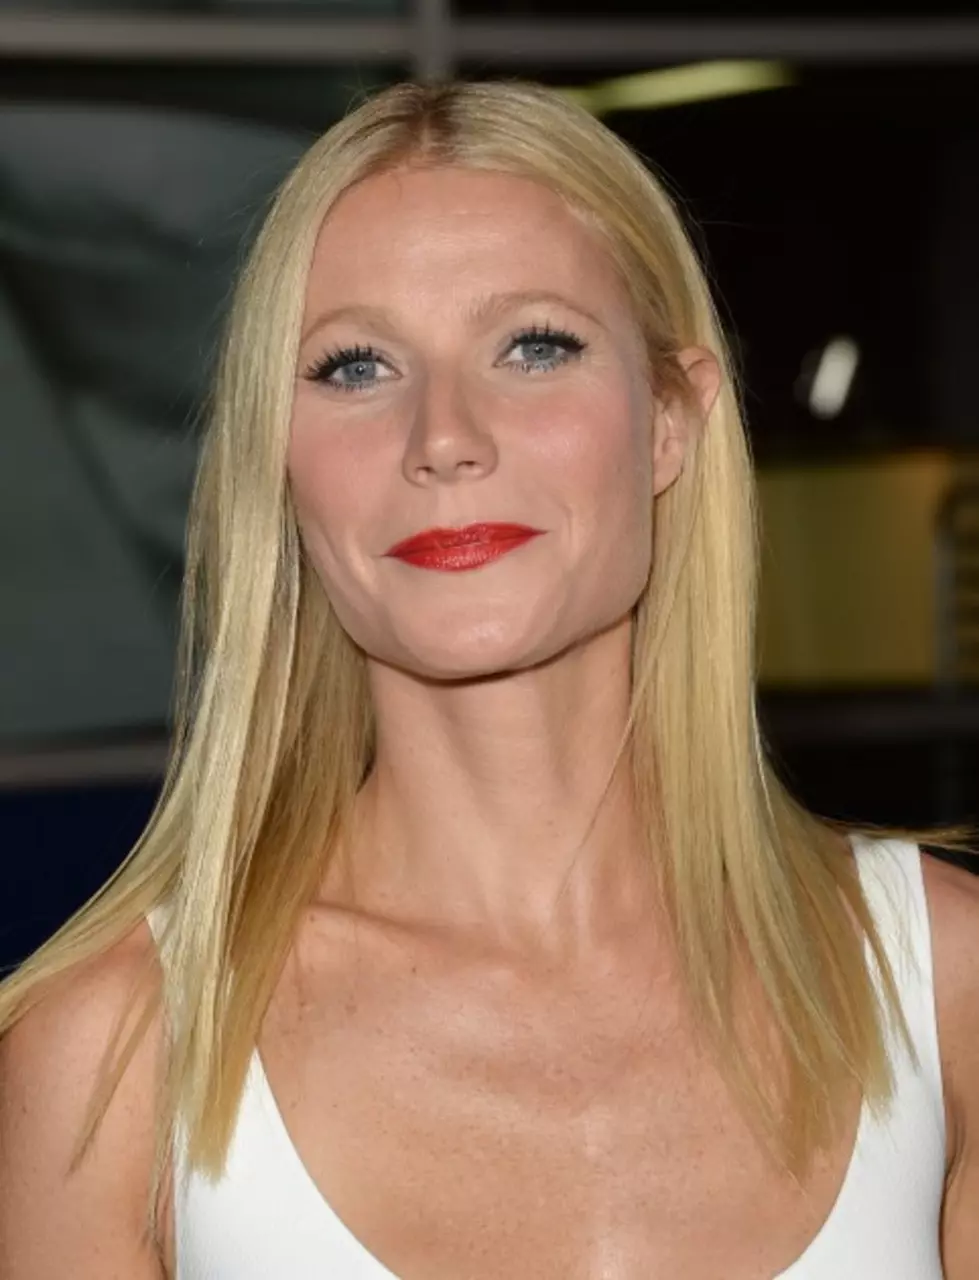 Were Gwyneth Paltrow&#8217;s Comments Out of Line? [POLL] [OPINION]